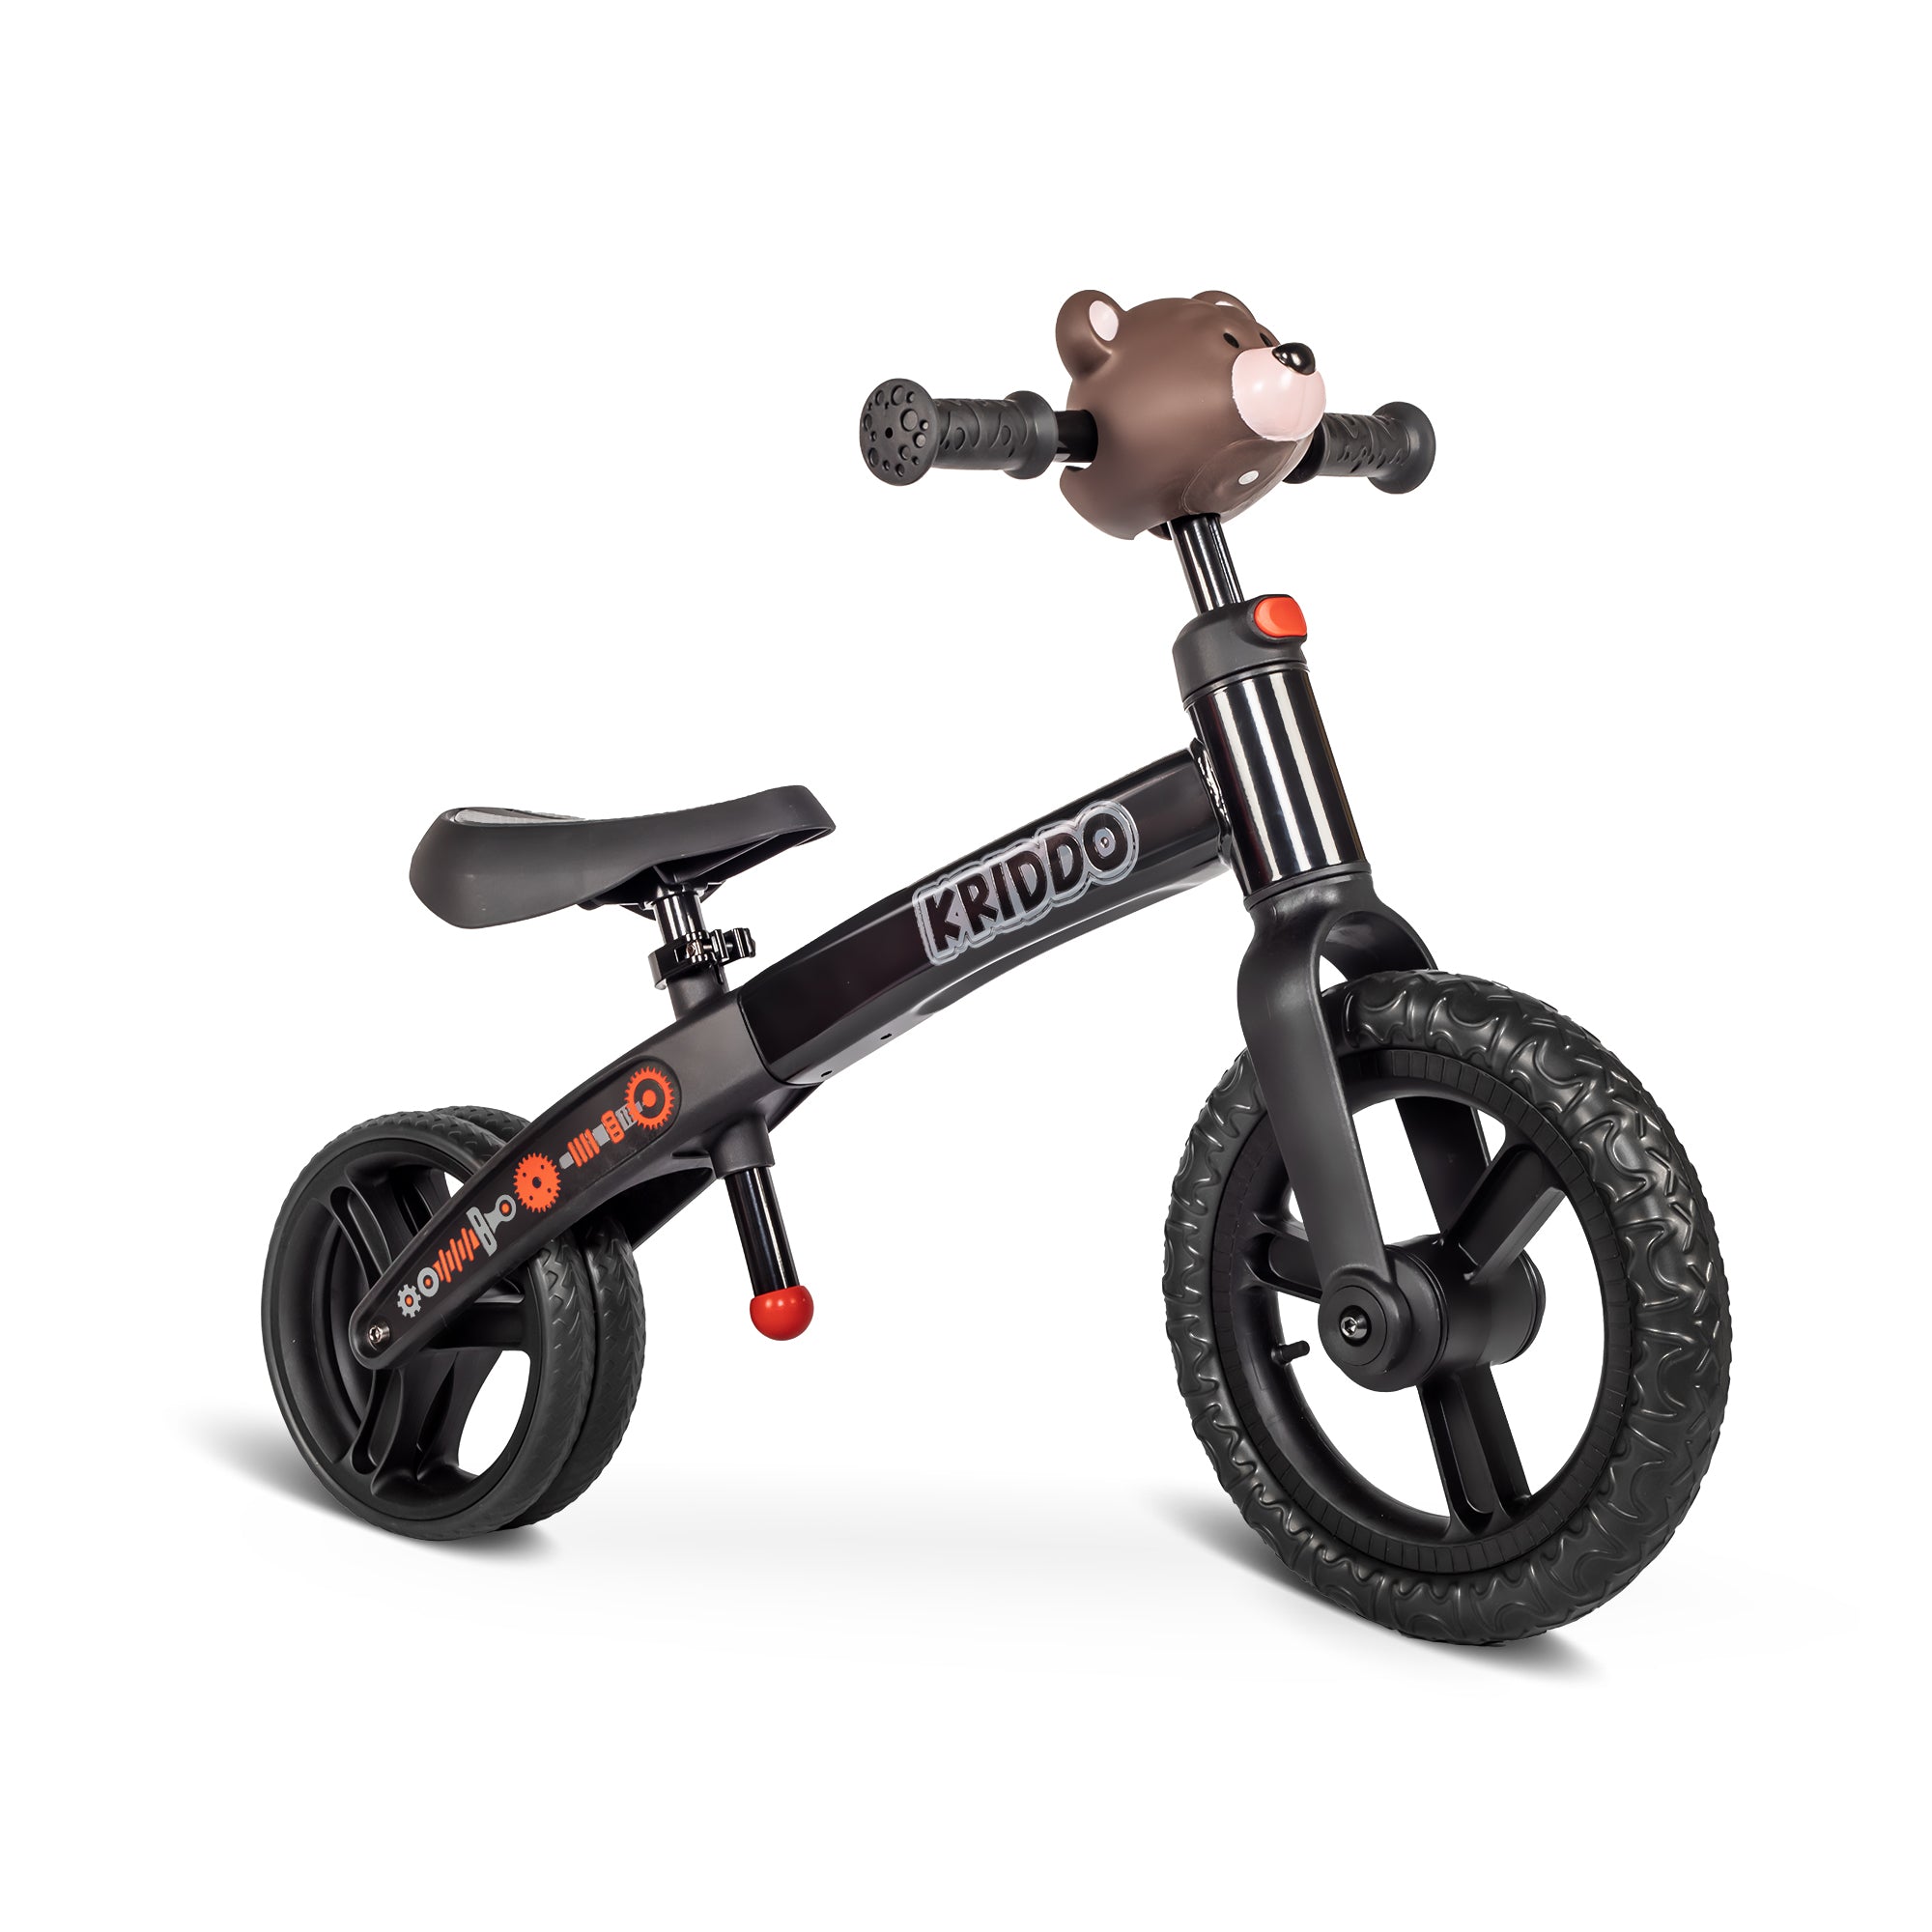 KRIDDO Toddler Balance Bike 2 Year Old, Age 18 Months to 5 Years Old, Early Learning Interactive Push Bicycle with Steady Balancing and Footrest, Gift for 2-5 Boys Girls, Black Dual